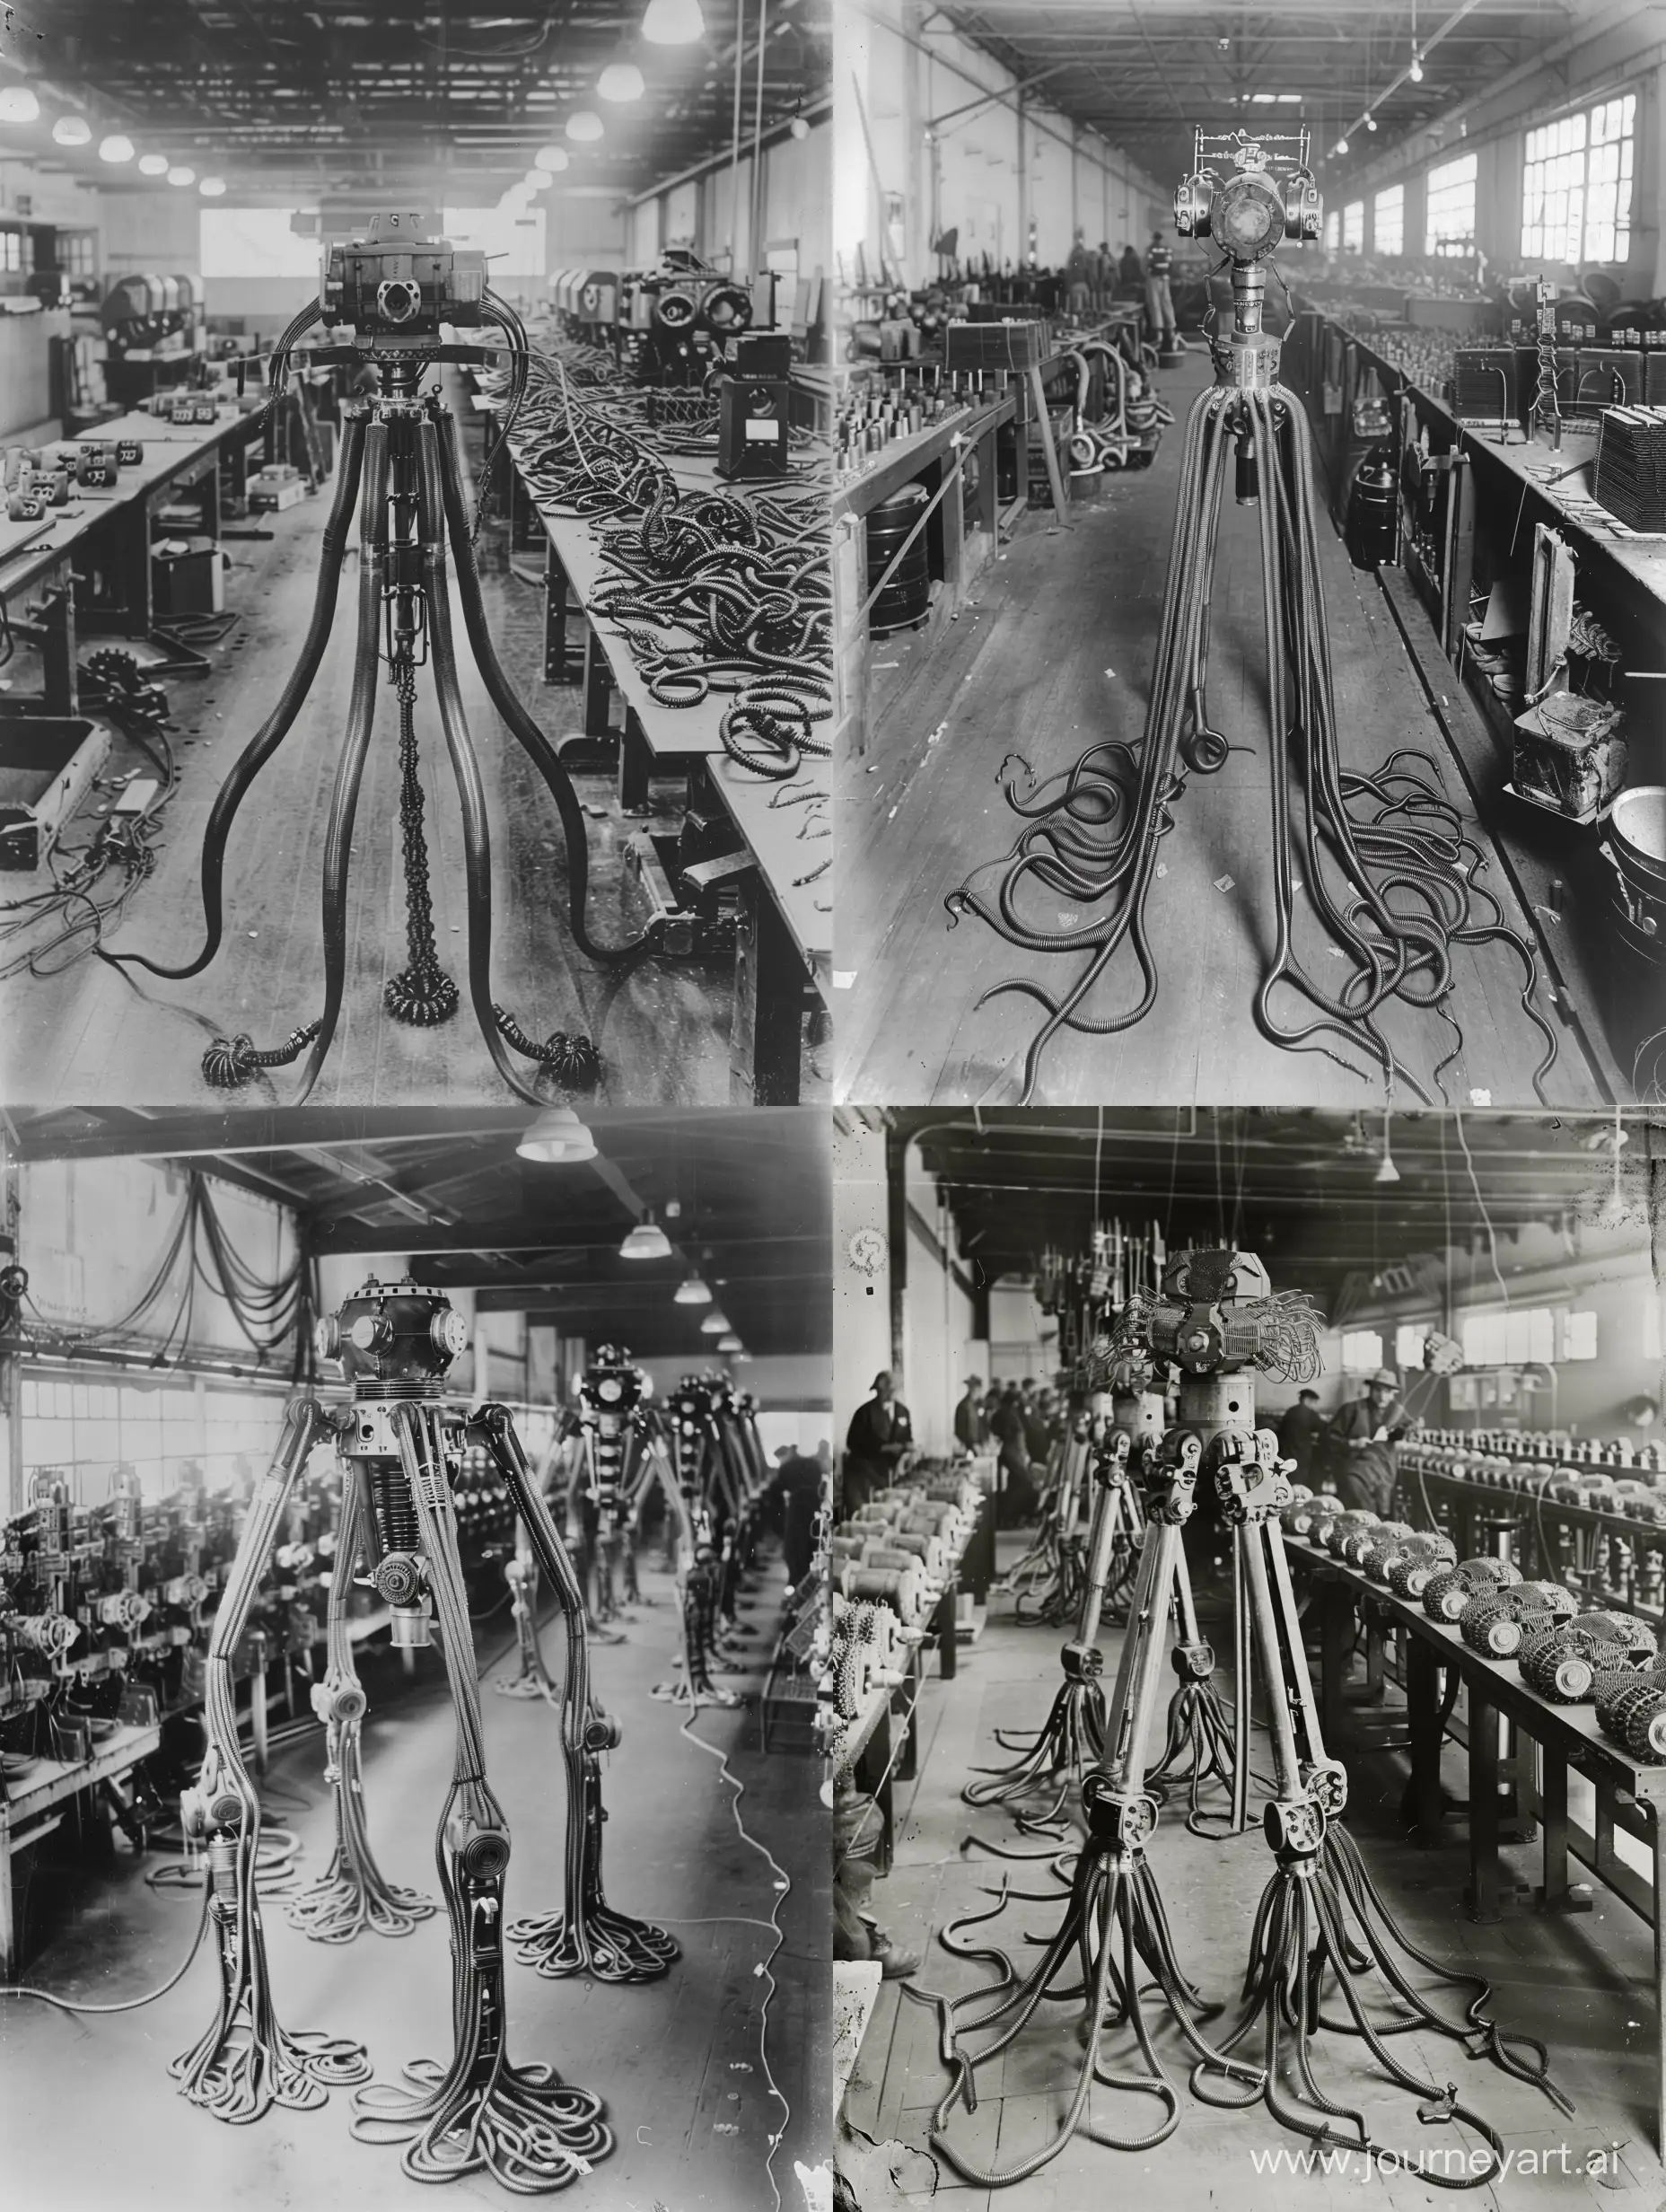 1933, old photo, tripod mech with tentacle like wires being constructed in a factory along side rows of other mechs and mech parts